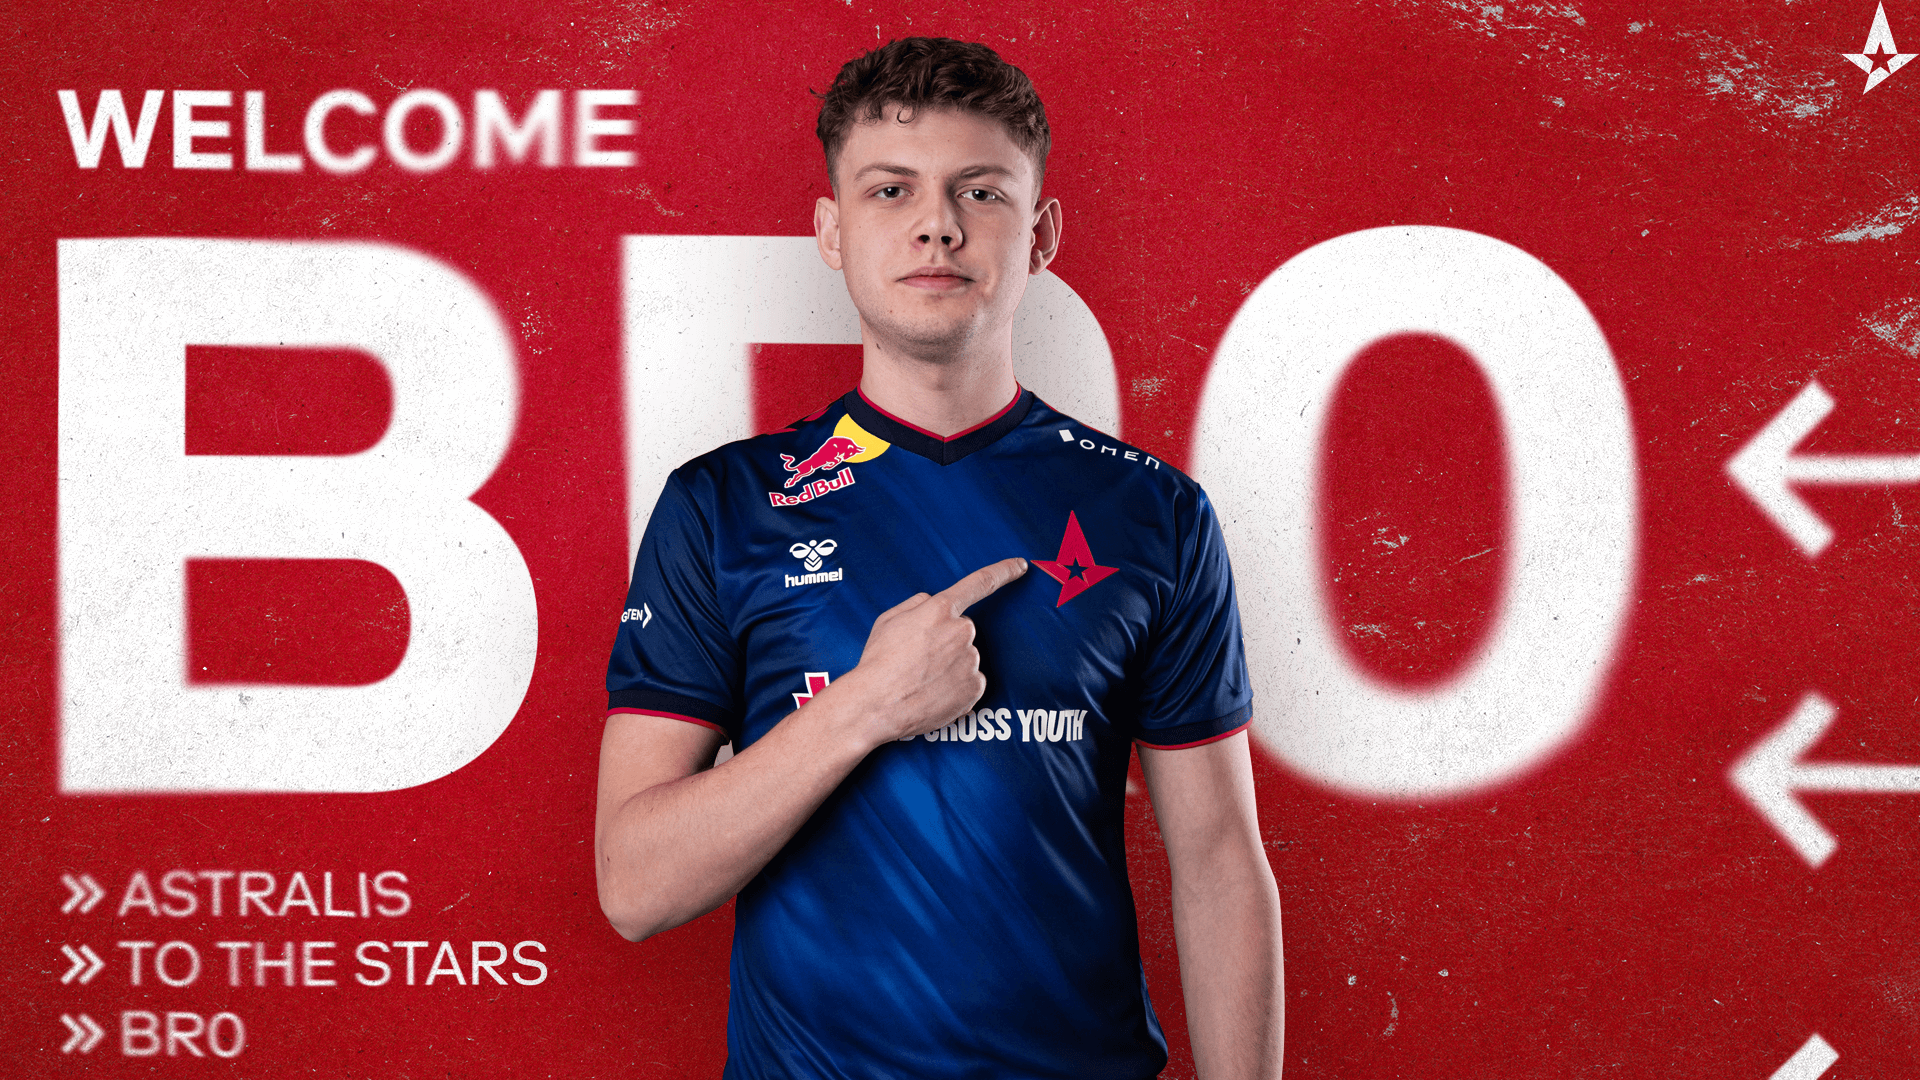 Astralis signs br0 to replace BlameF, Dev1ce to IGL